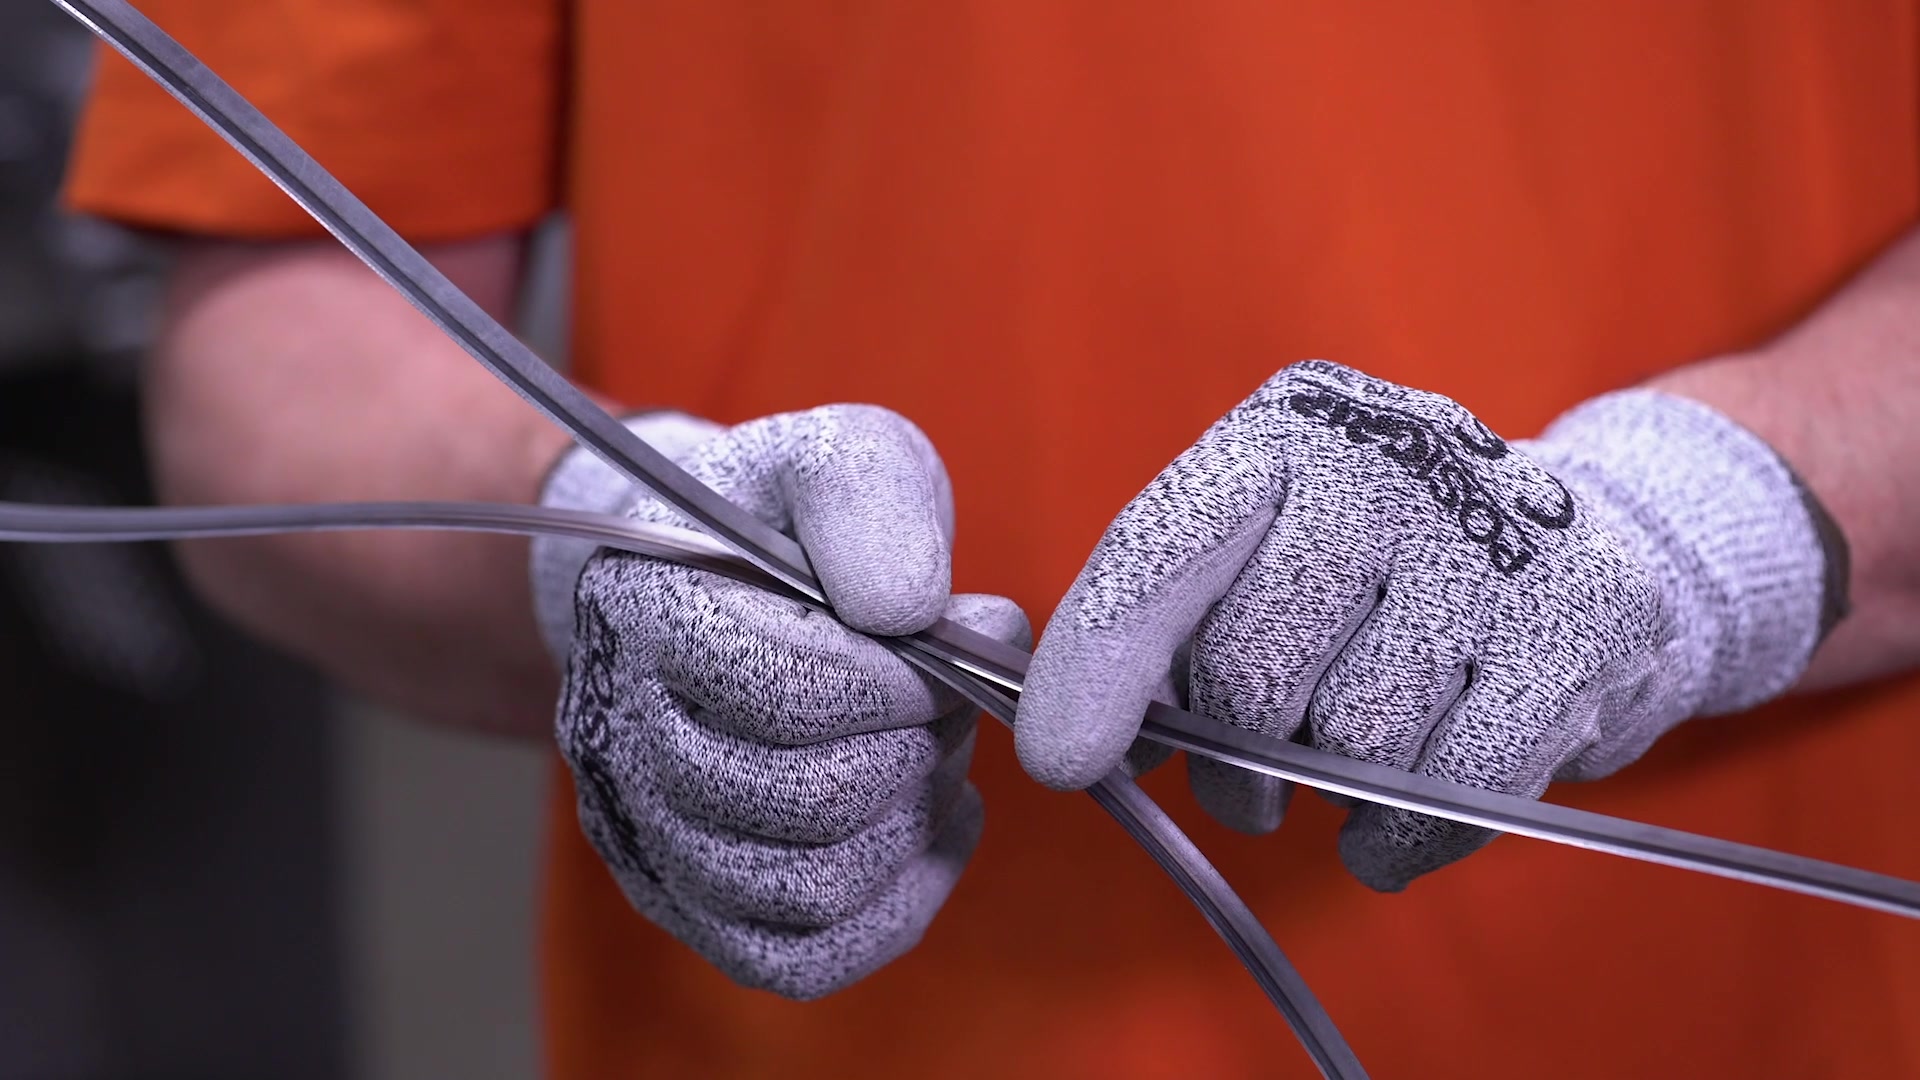 A technician holds a Grote band blade with safety gloves.